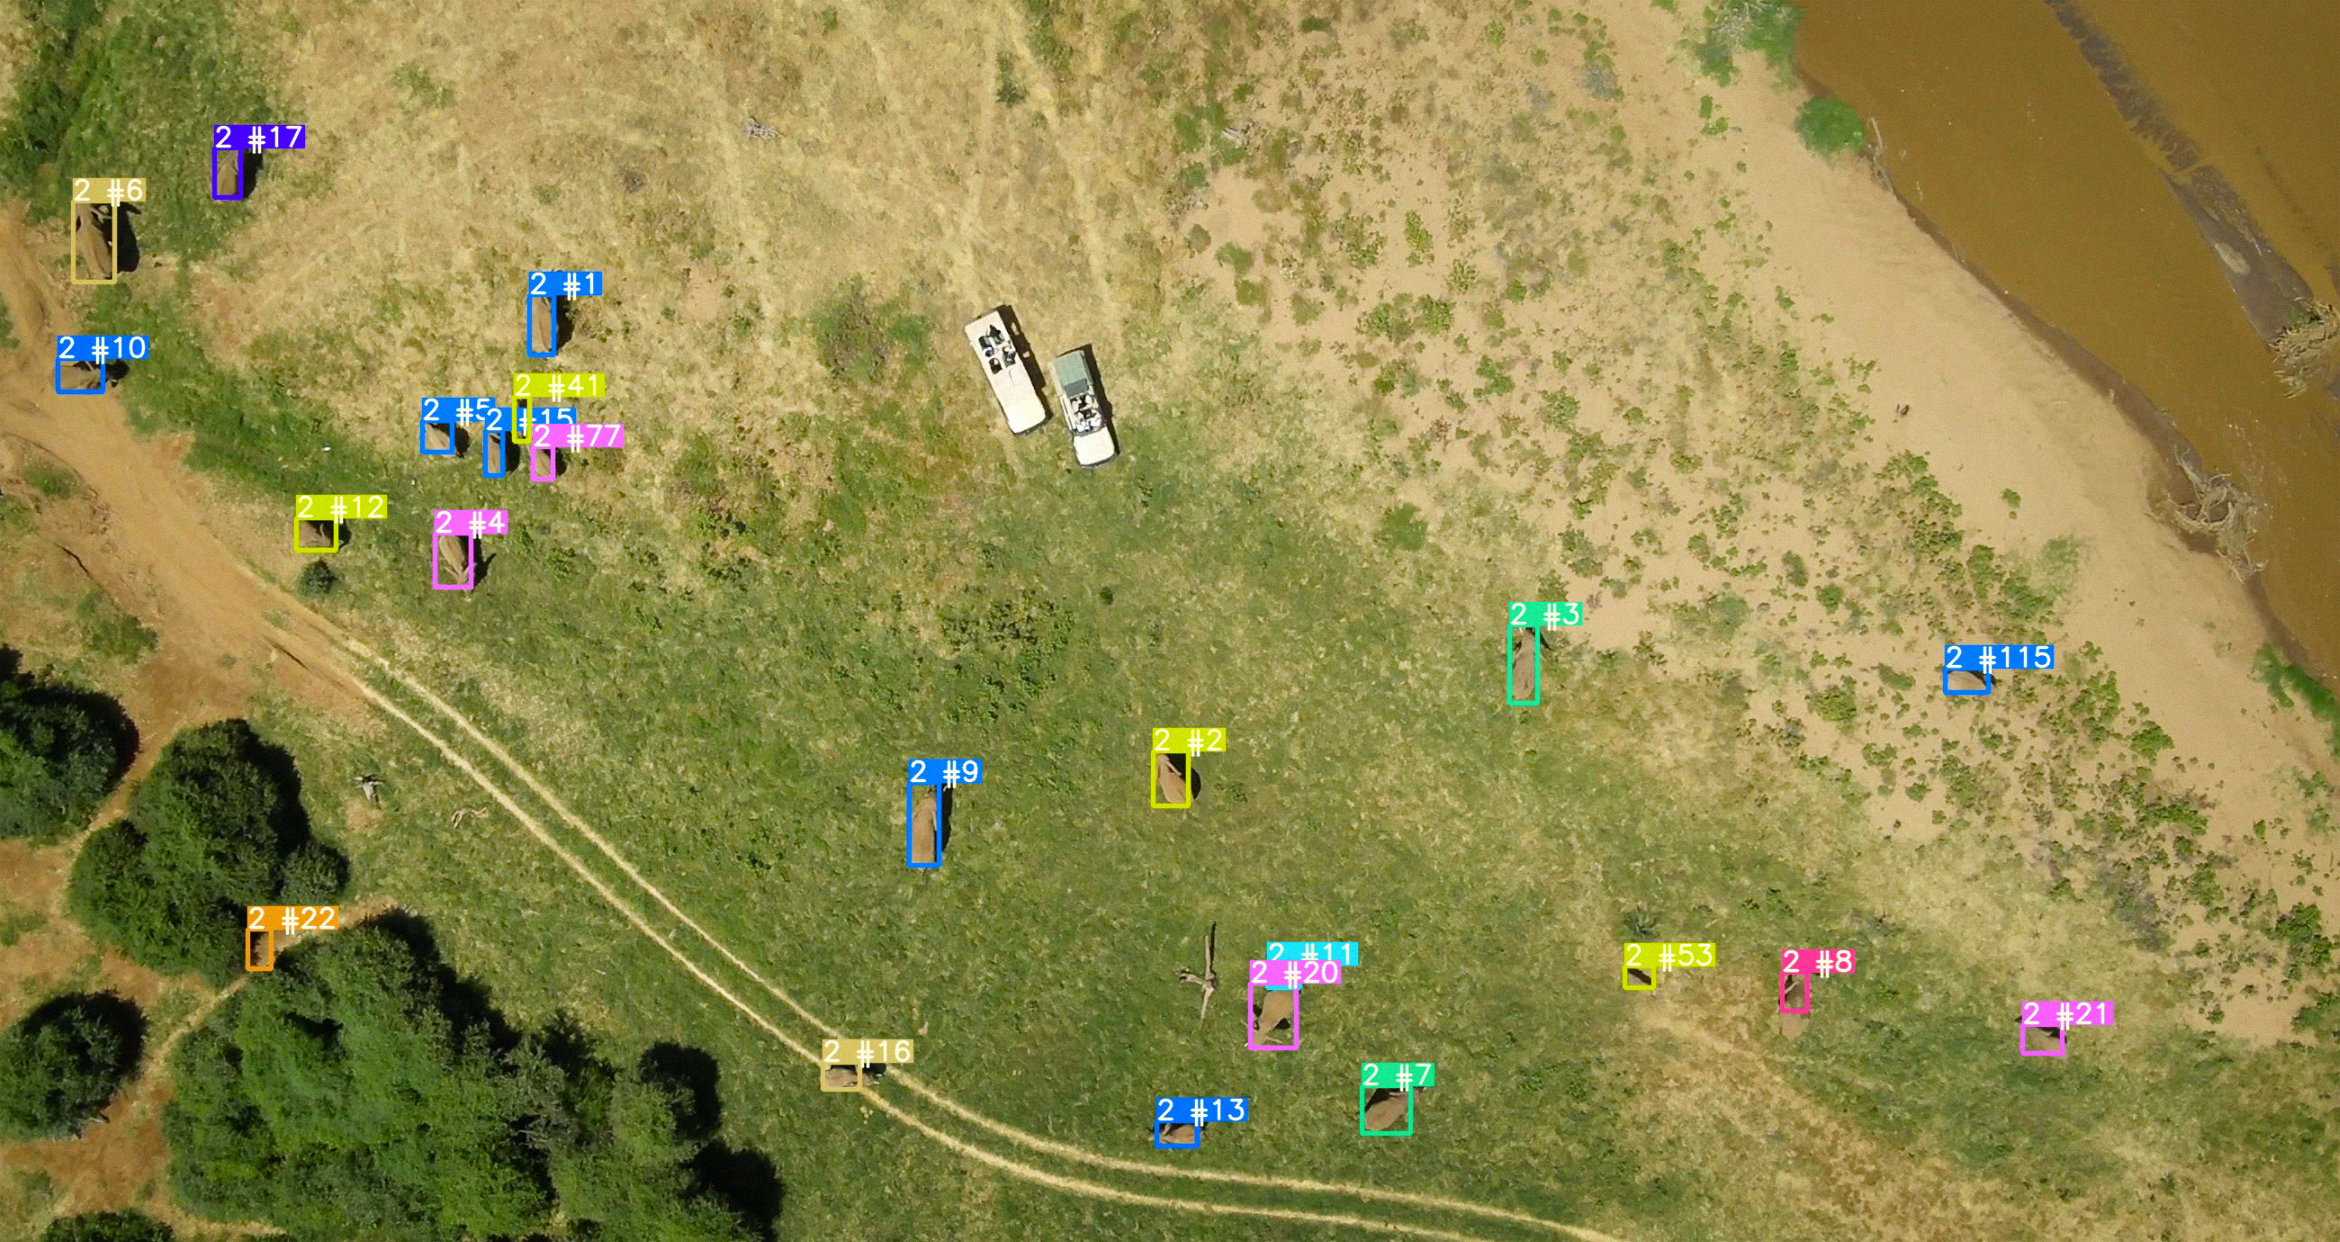 Aerial image with elephants labeled by software